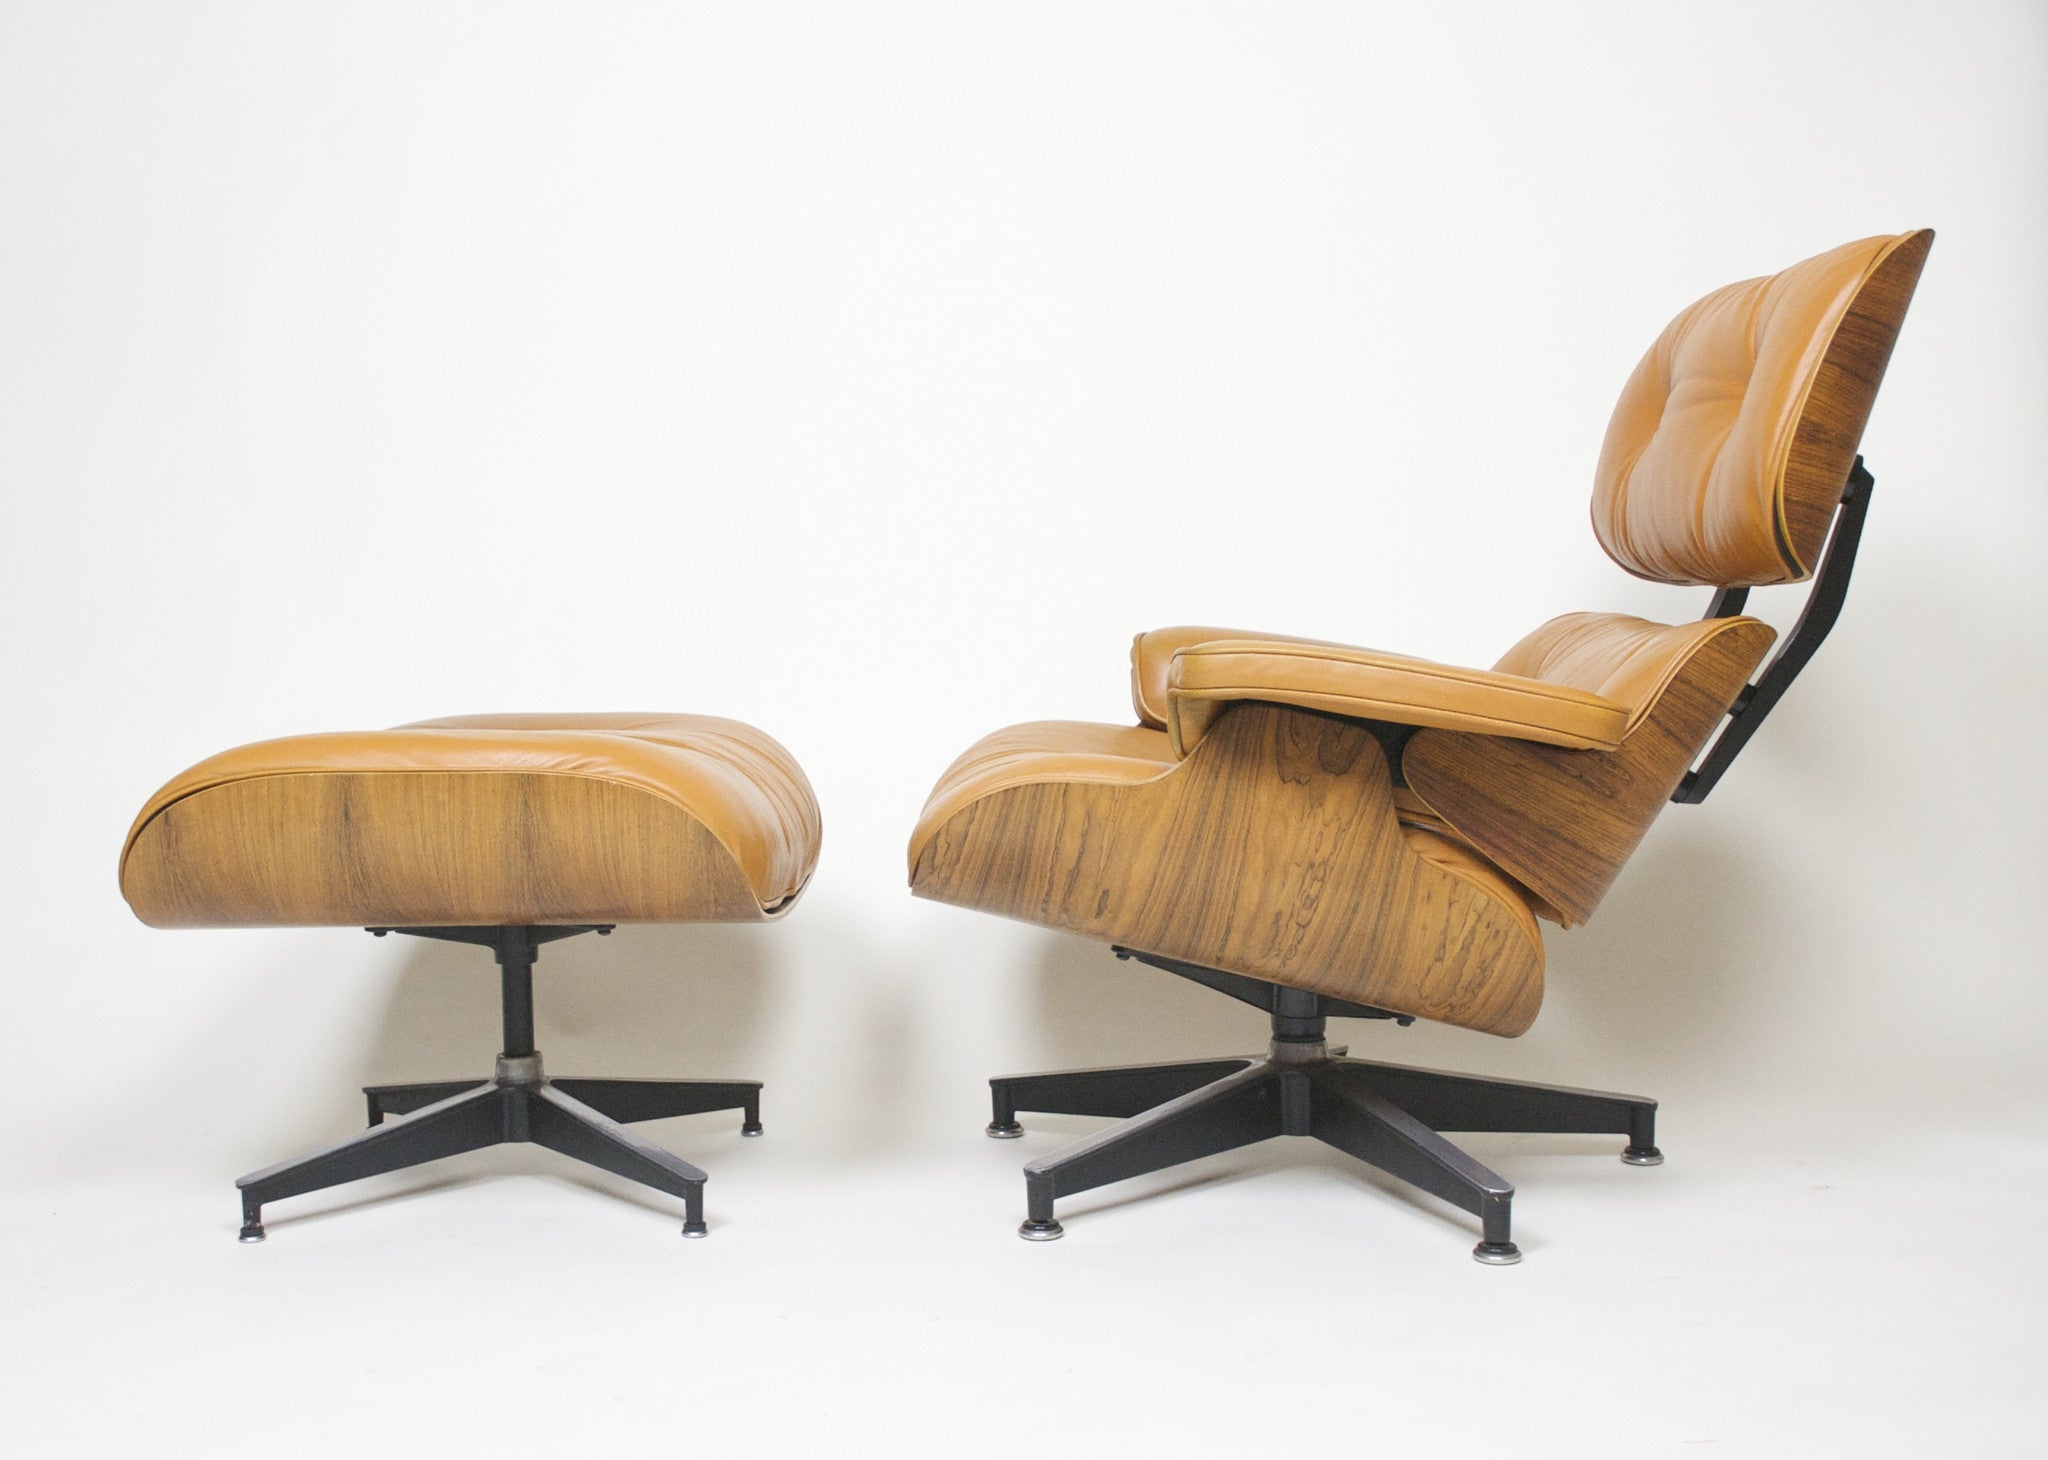 SOLD Herman Miller Eames Lounge Chair & Ottoman Rosewood 670 671 Set 2 1970's